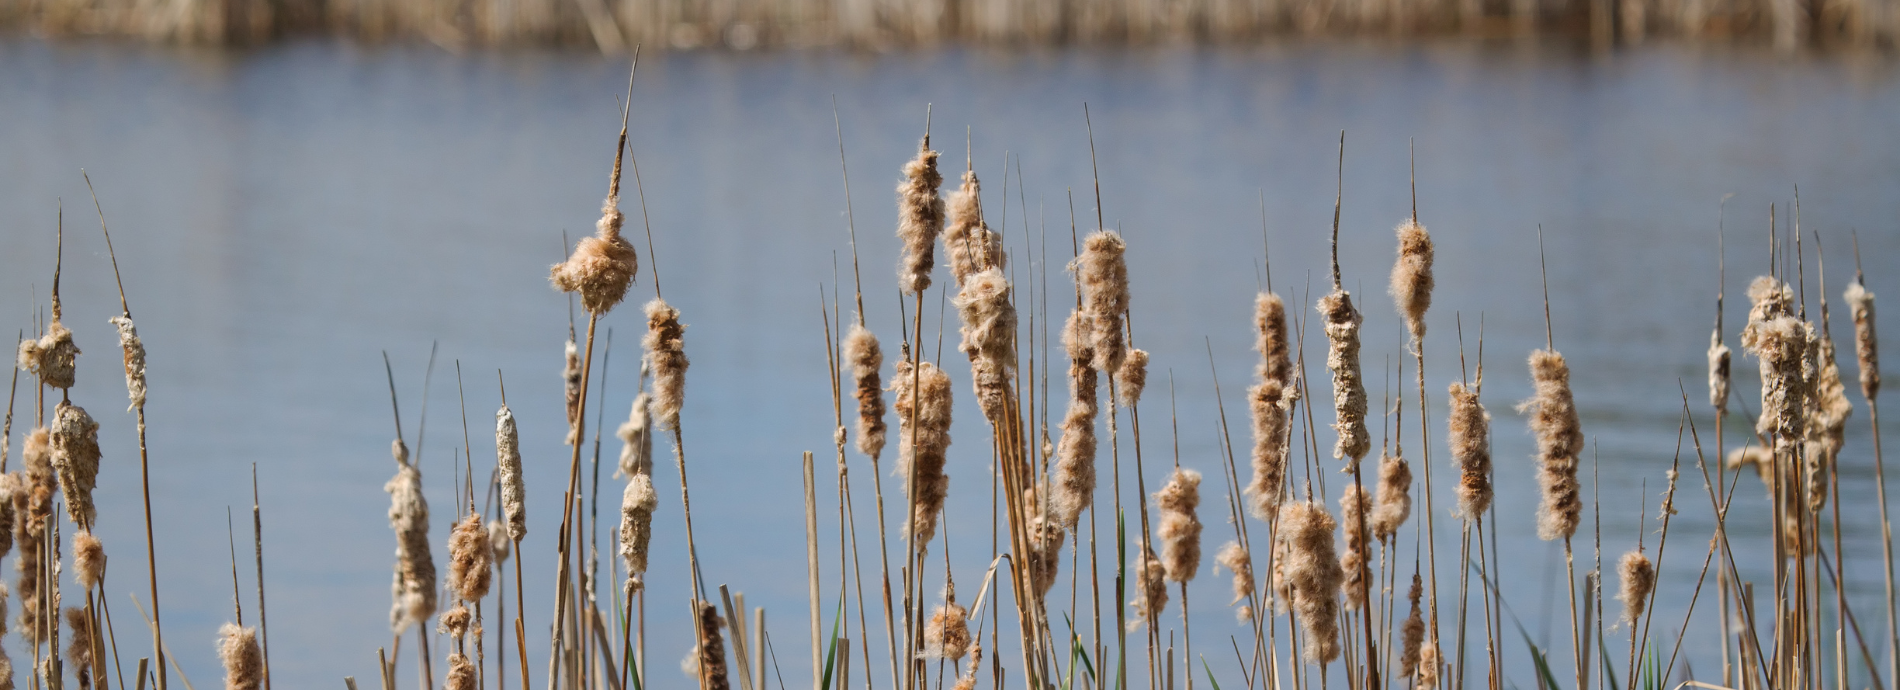 cat tails along a rural river